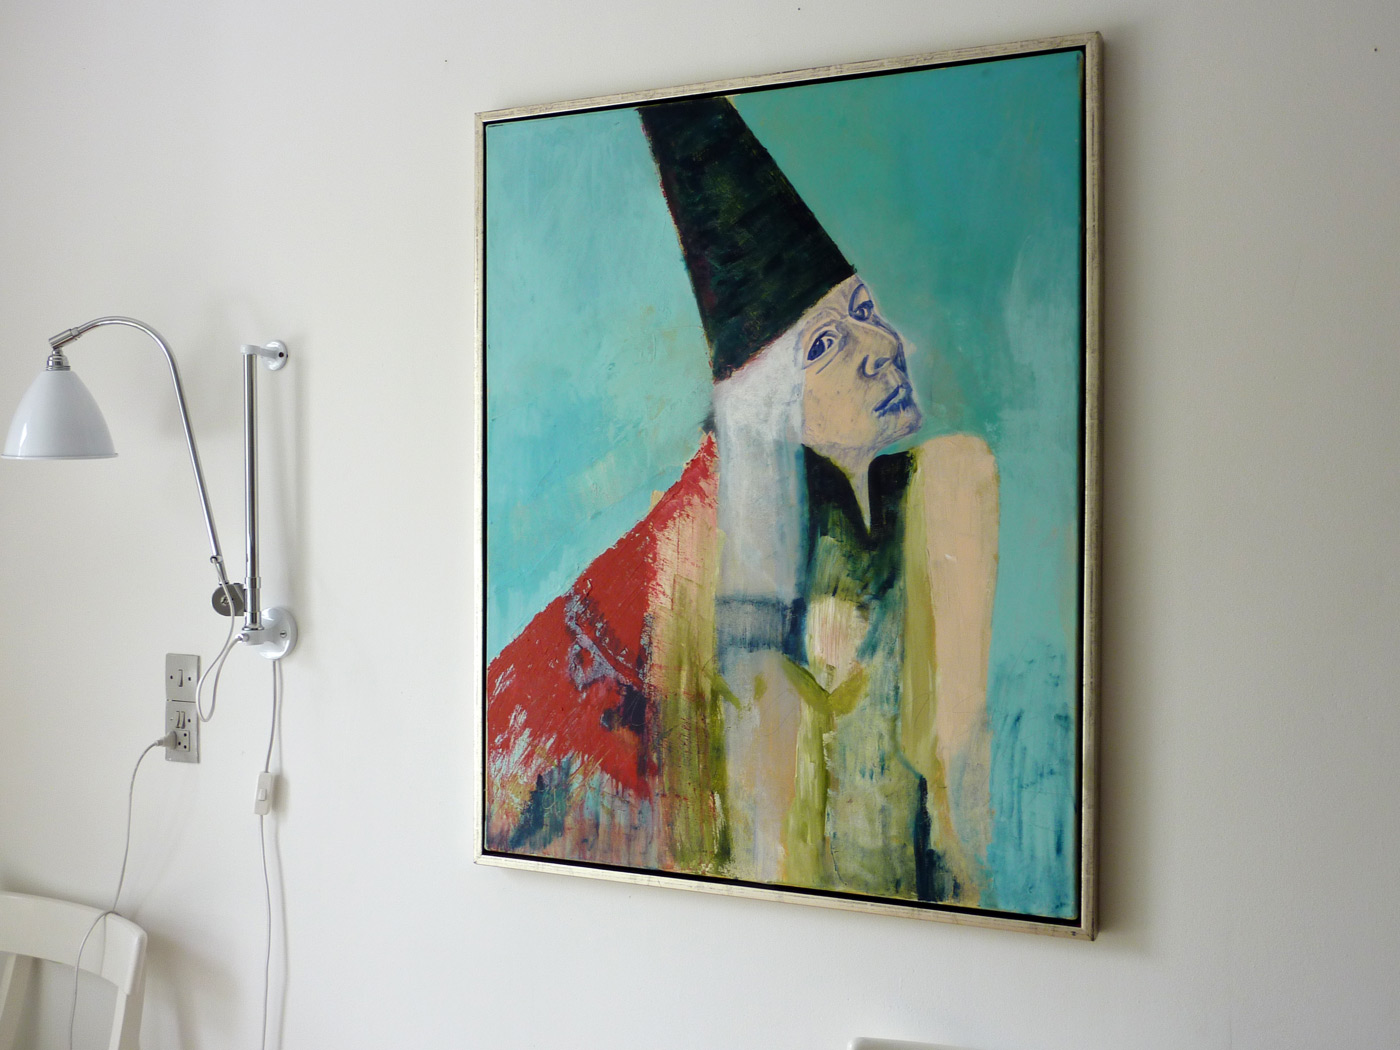 paintings, family-friendly, figurative, portraiture, people, red, turquoise, acrylic, cotton-canvas, faces, fantasy, women, Buy original high quality art. Paintings, drawings, limited edition prints & posters by talented artists.